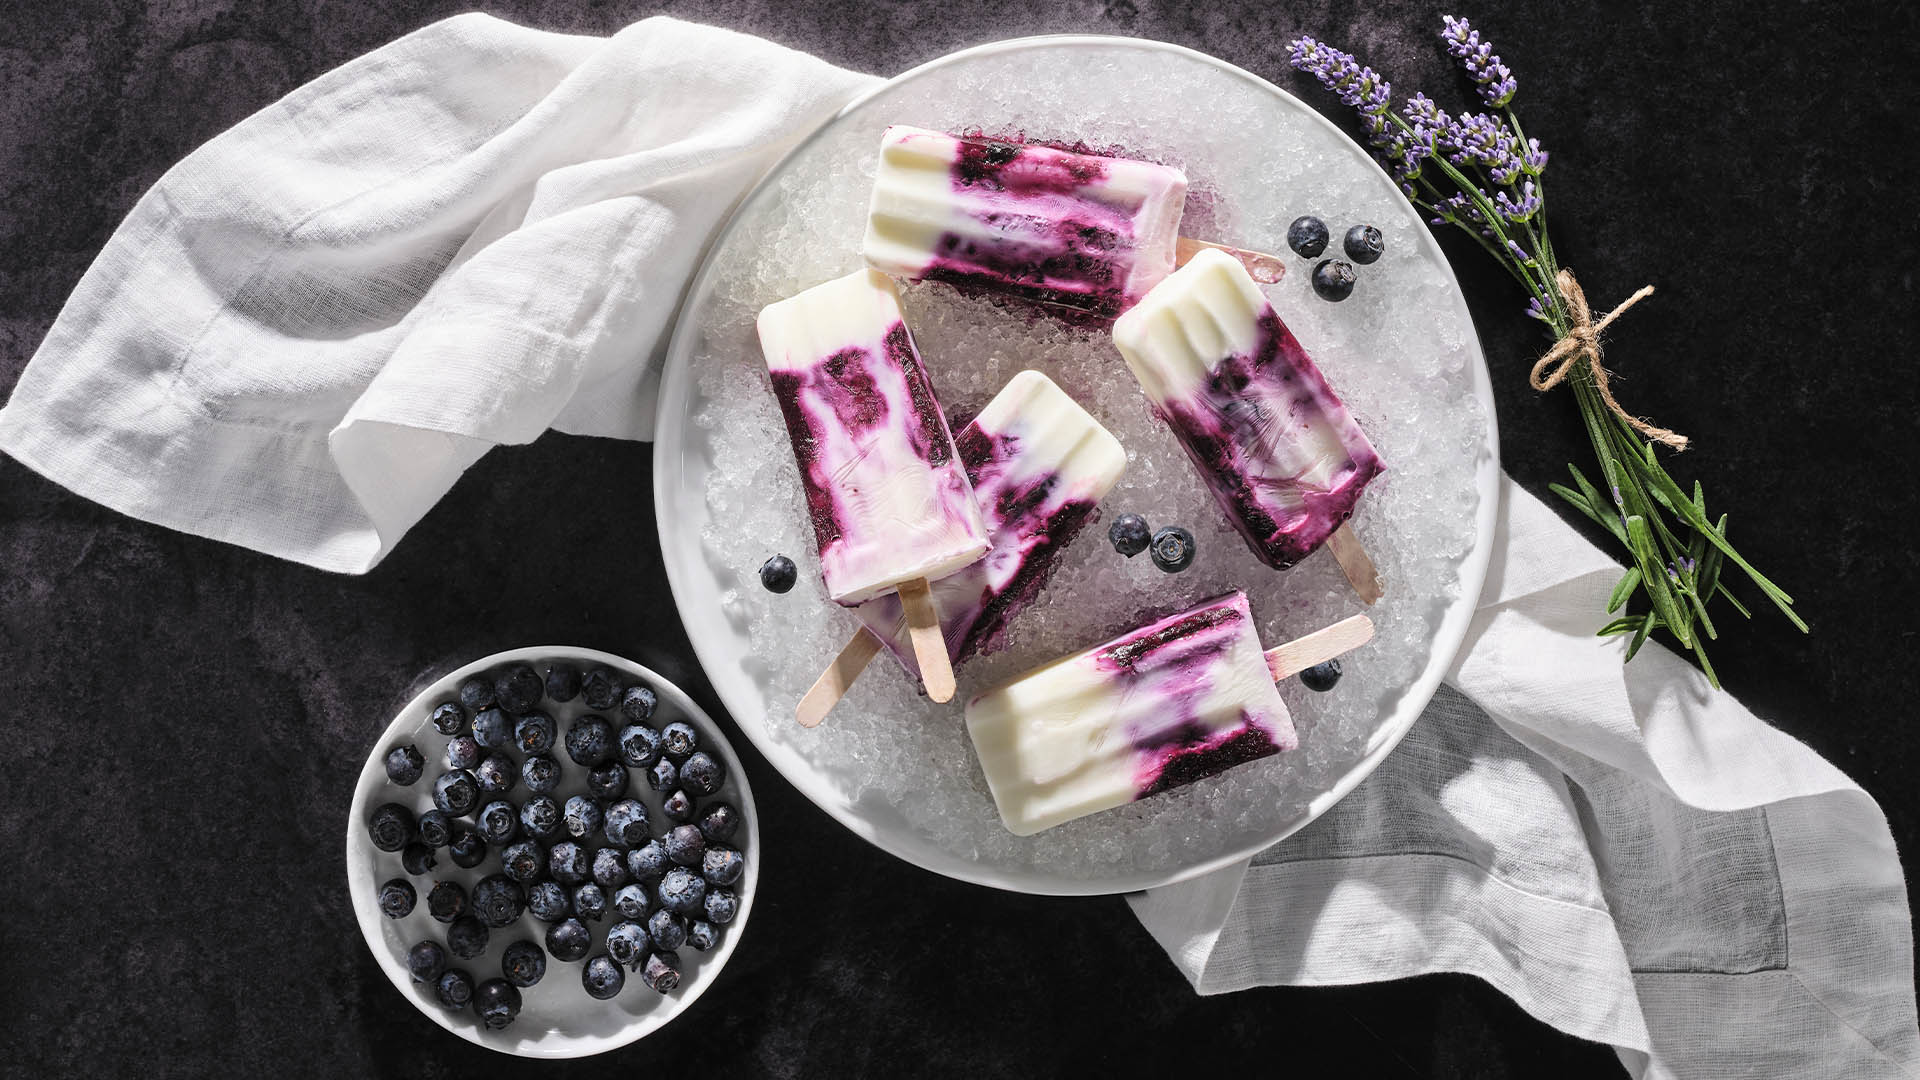 A round white plate with blueberry lavender yogurt popsicles on a bed of crushed ice, with blueberries strewn around the popsicles. A small white plate with fresh blueberries and a bundle of fresh lavender. 